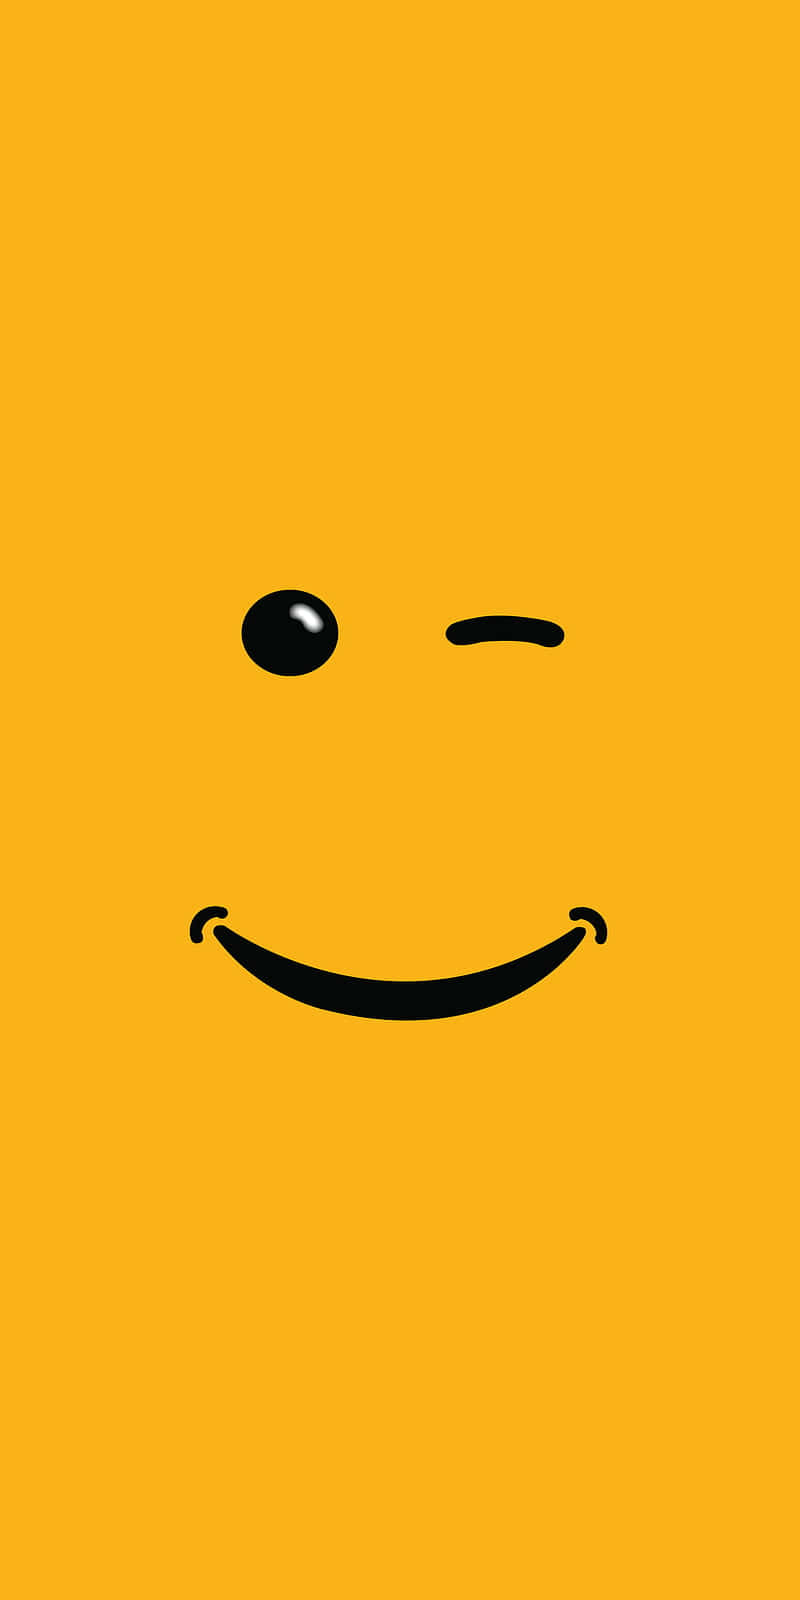 A Yellow Smiley Face With Black Eyes Wallpaper